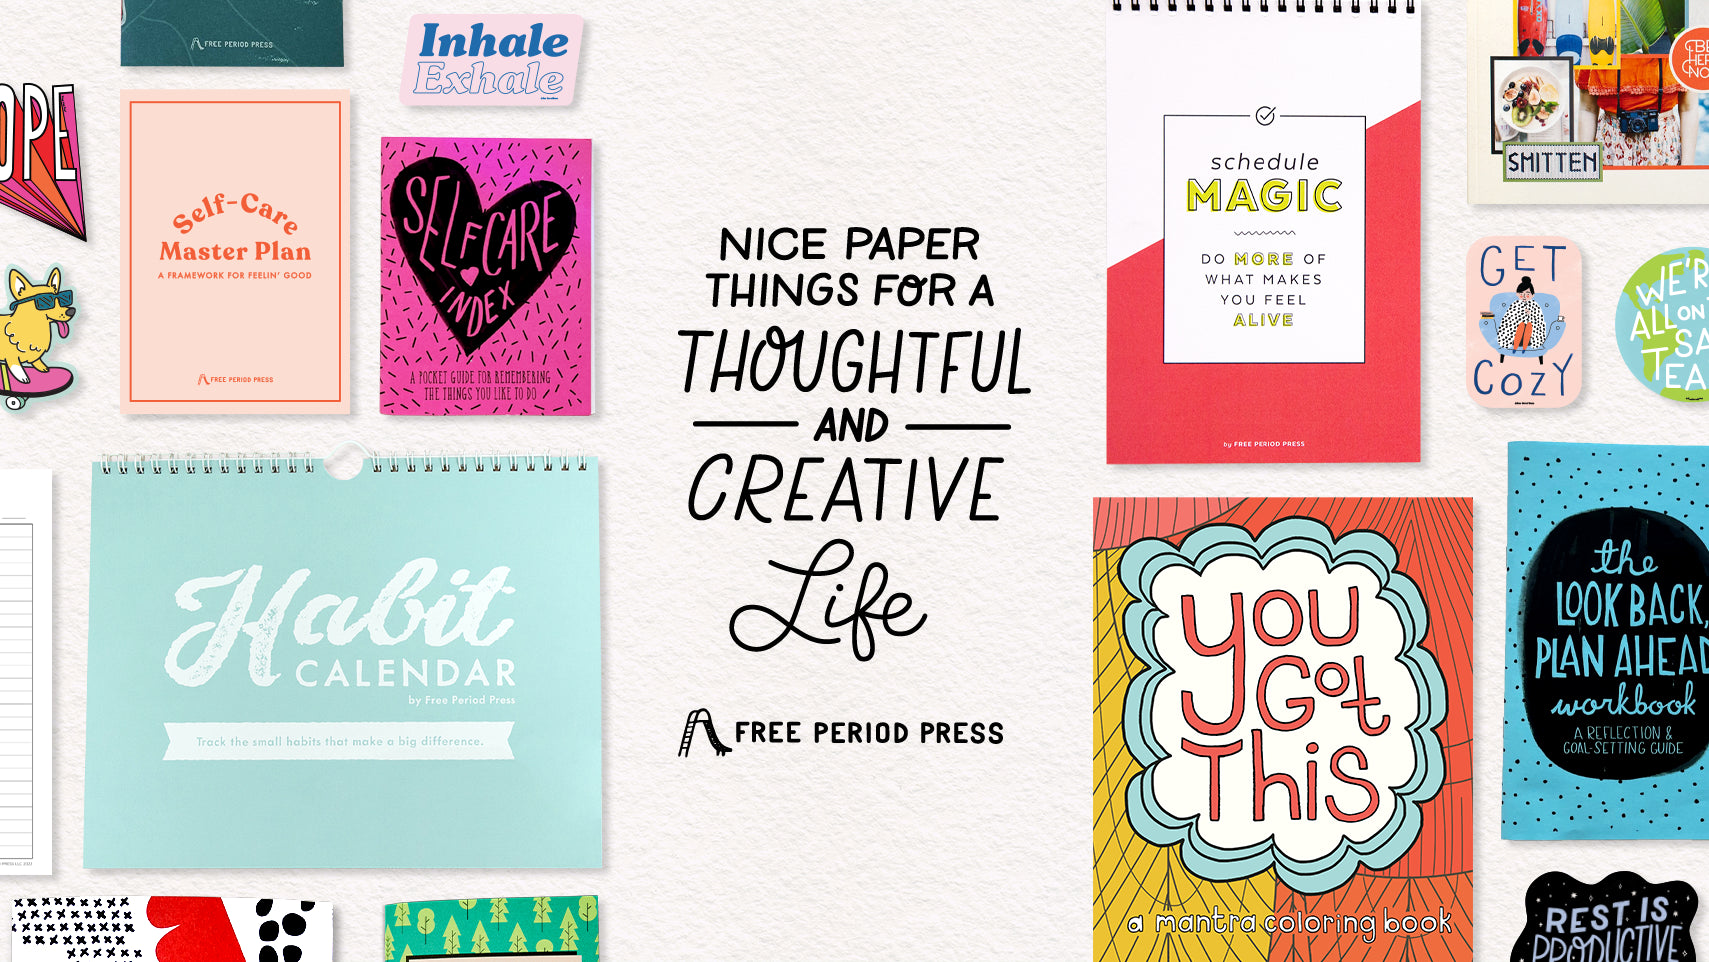 Nice paper things for a thoughtful and creative life